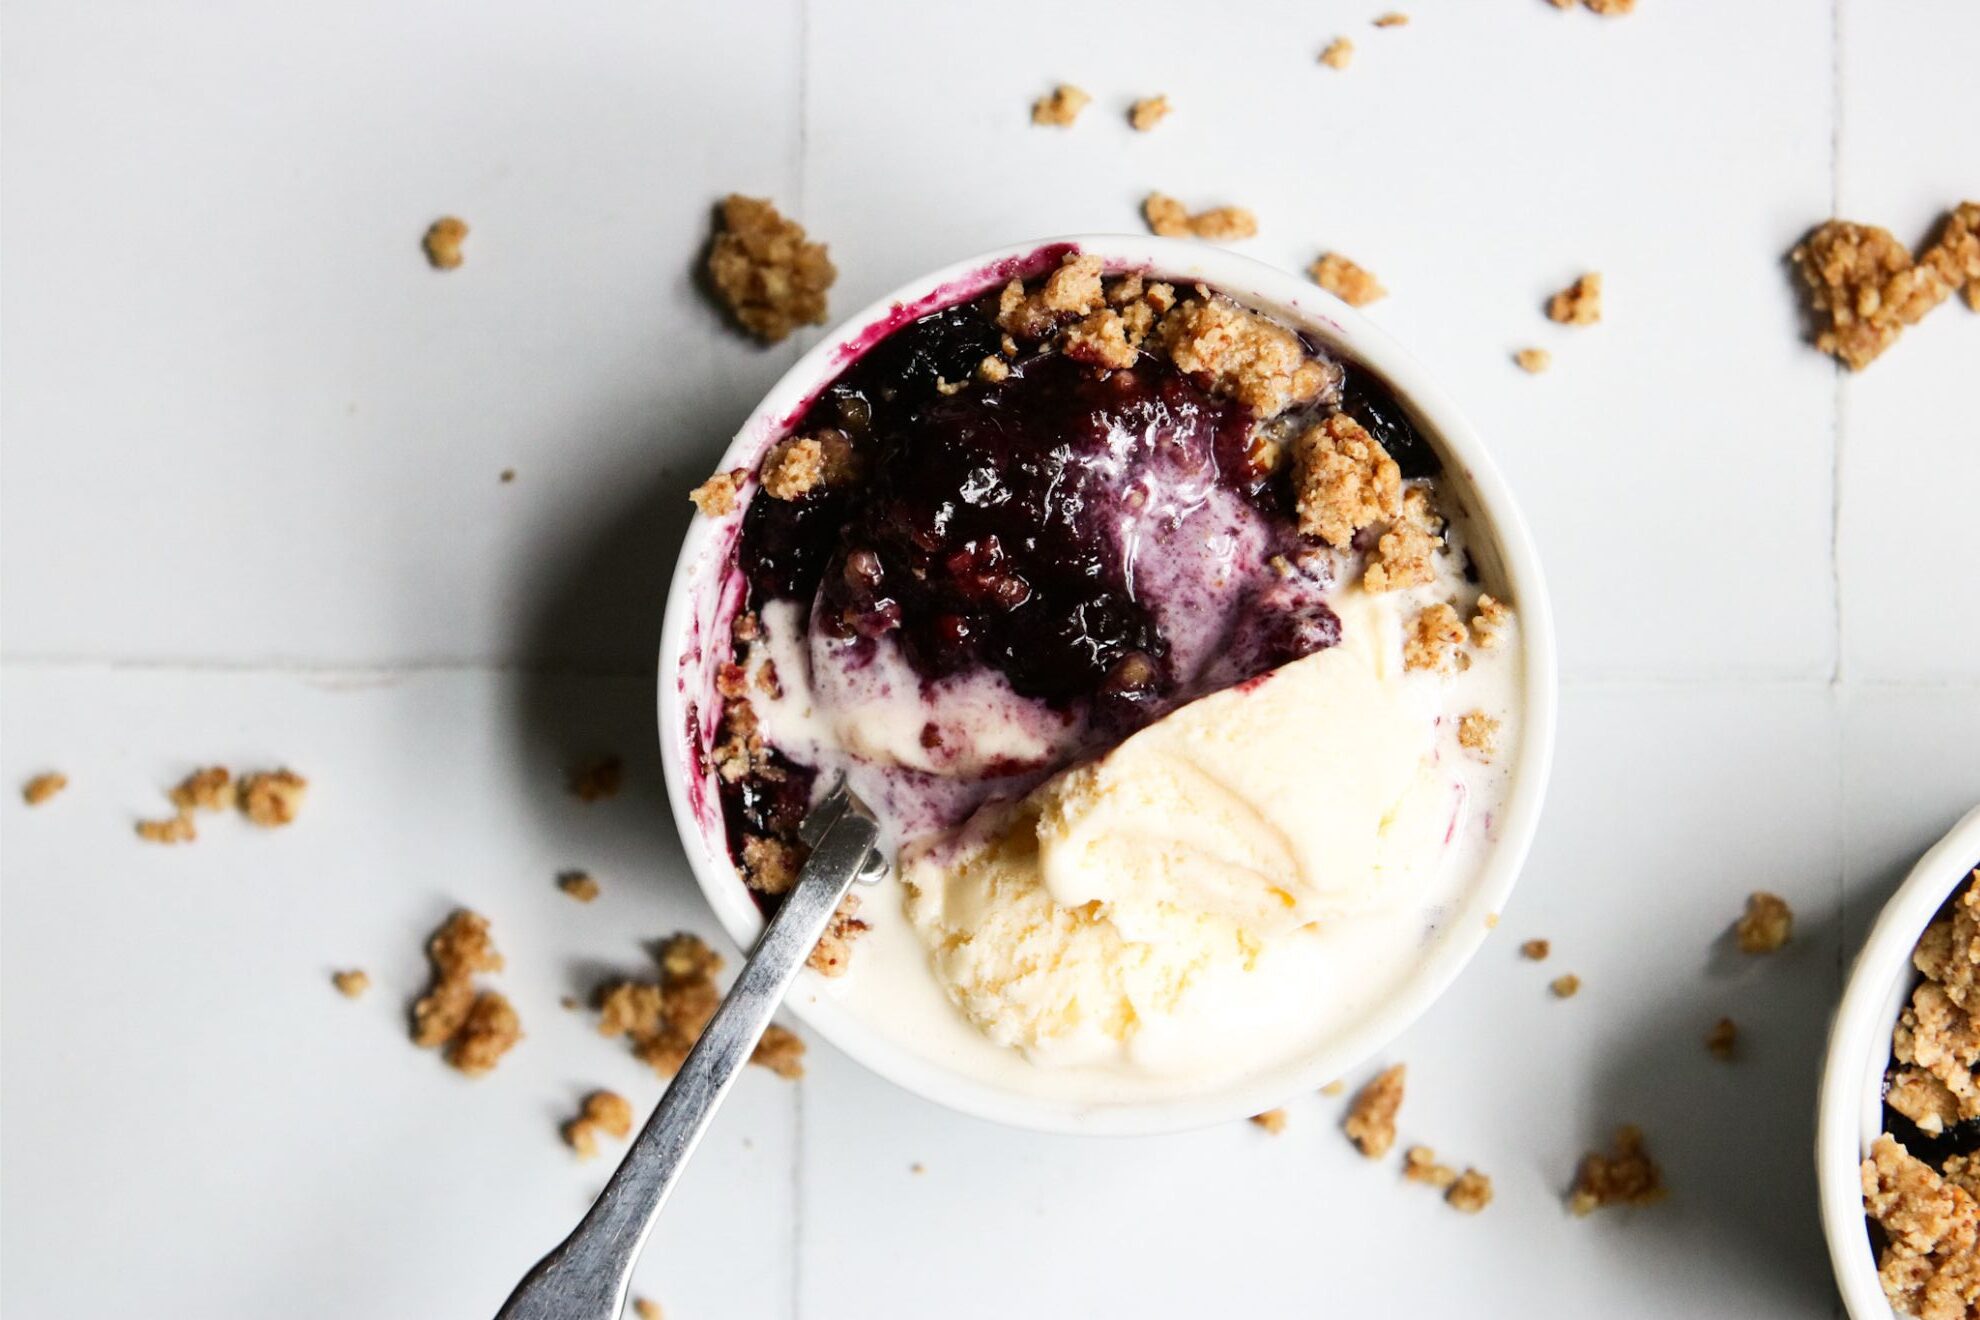 This is a vertical overhead image of one white ramekin with a nutty crumble and blueberry glaze scooped up with a silver spoon. The handle of the spoon is sticking out of the ramekin, leaning against the side and pointing at the right side of the image. Vanilla ice cream is on top of the crumble, mainly to the top right of the ramekin, and melting into it. Another ramekin with blueberry crisp is in the top right corner of the image. The ramekins sit on a white square tiled surface with more crumbles that have fallen around them.